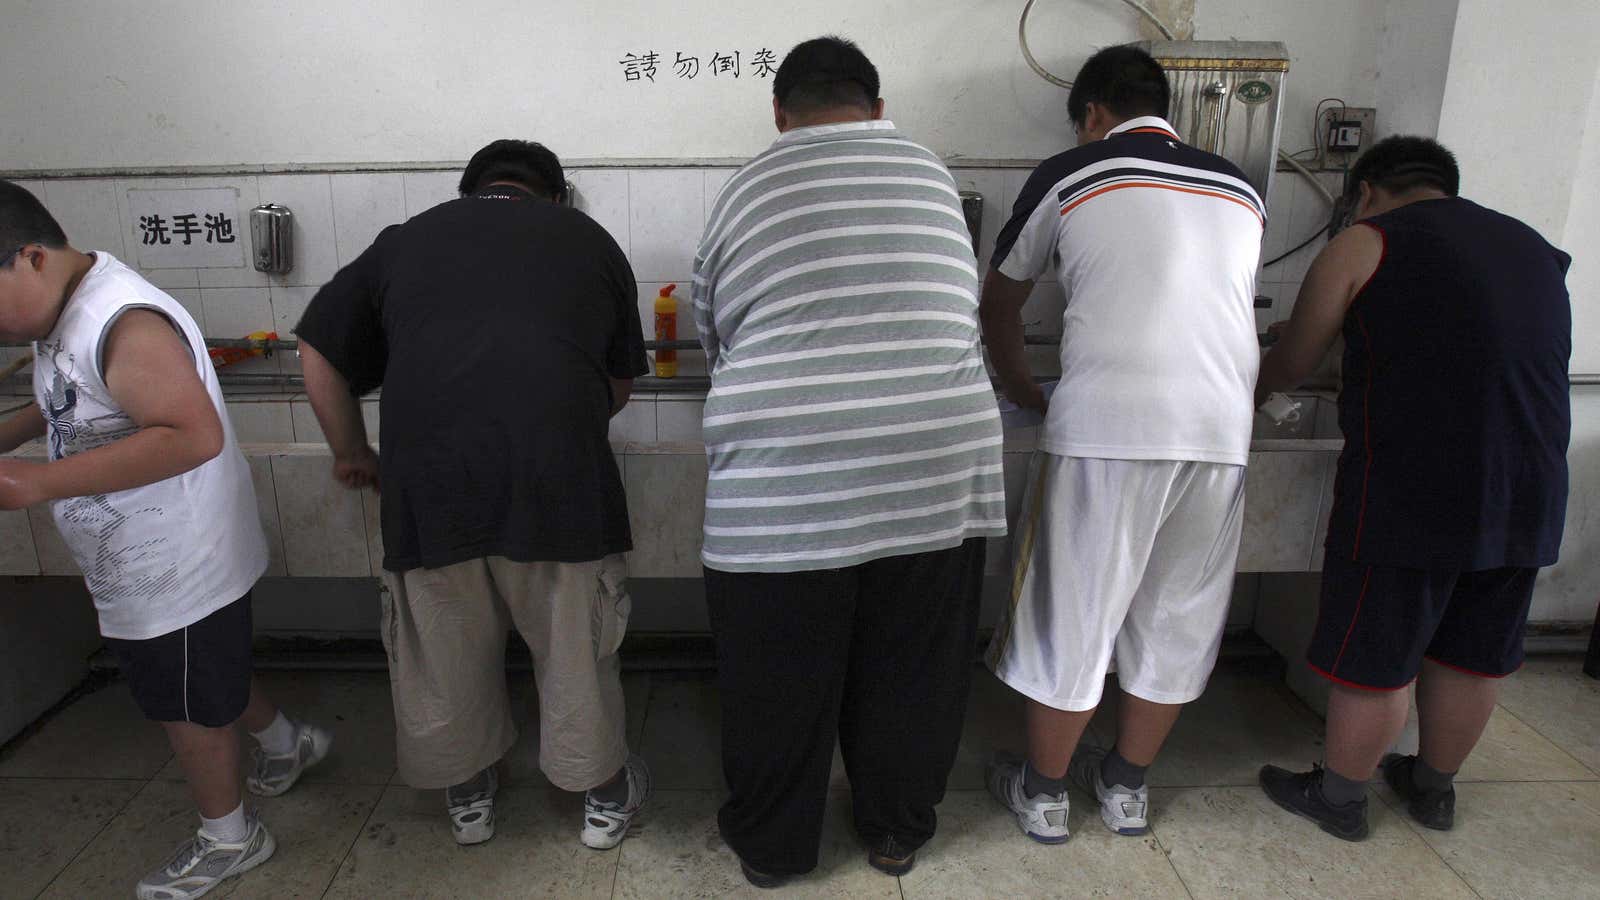 China’s population is gaining weight and the government is going to end up paying for it.